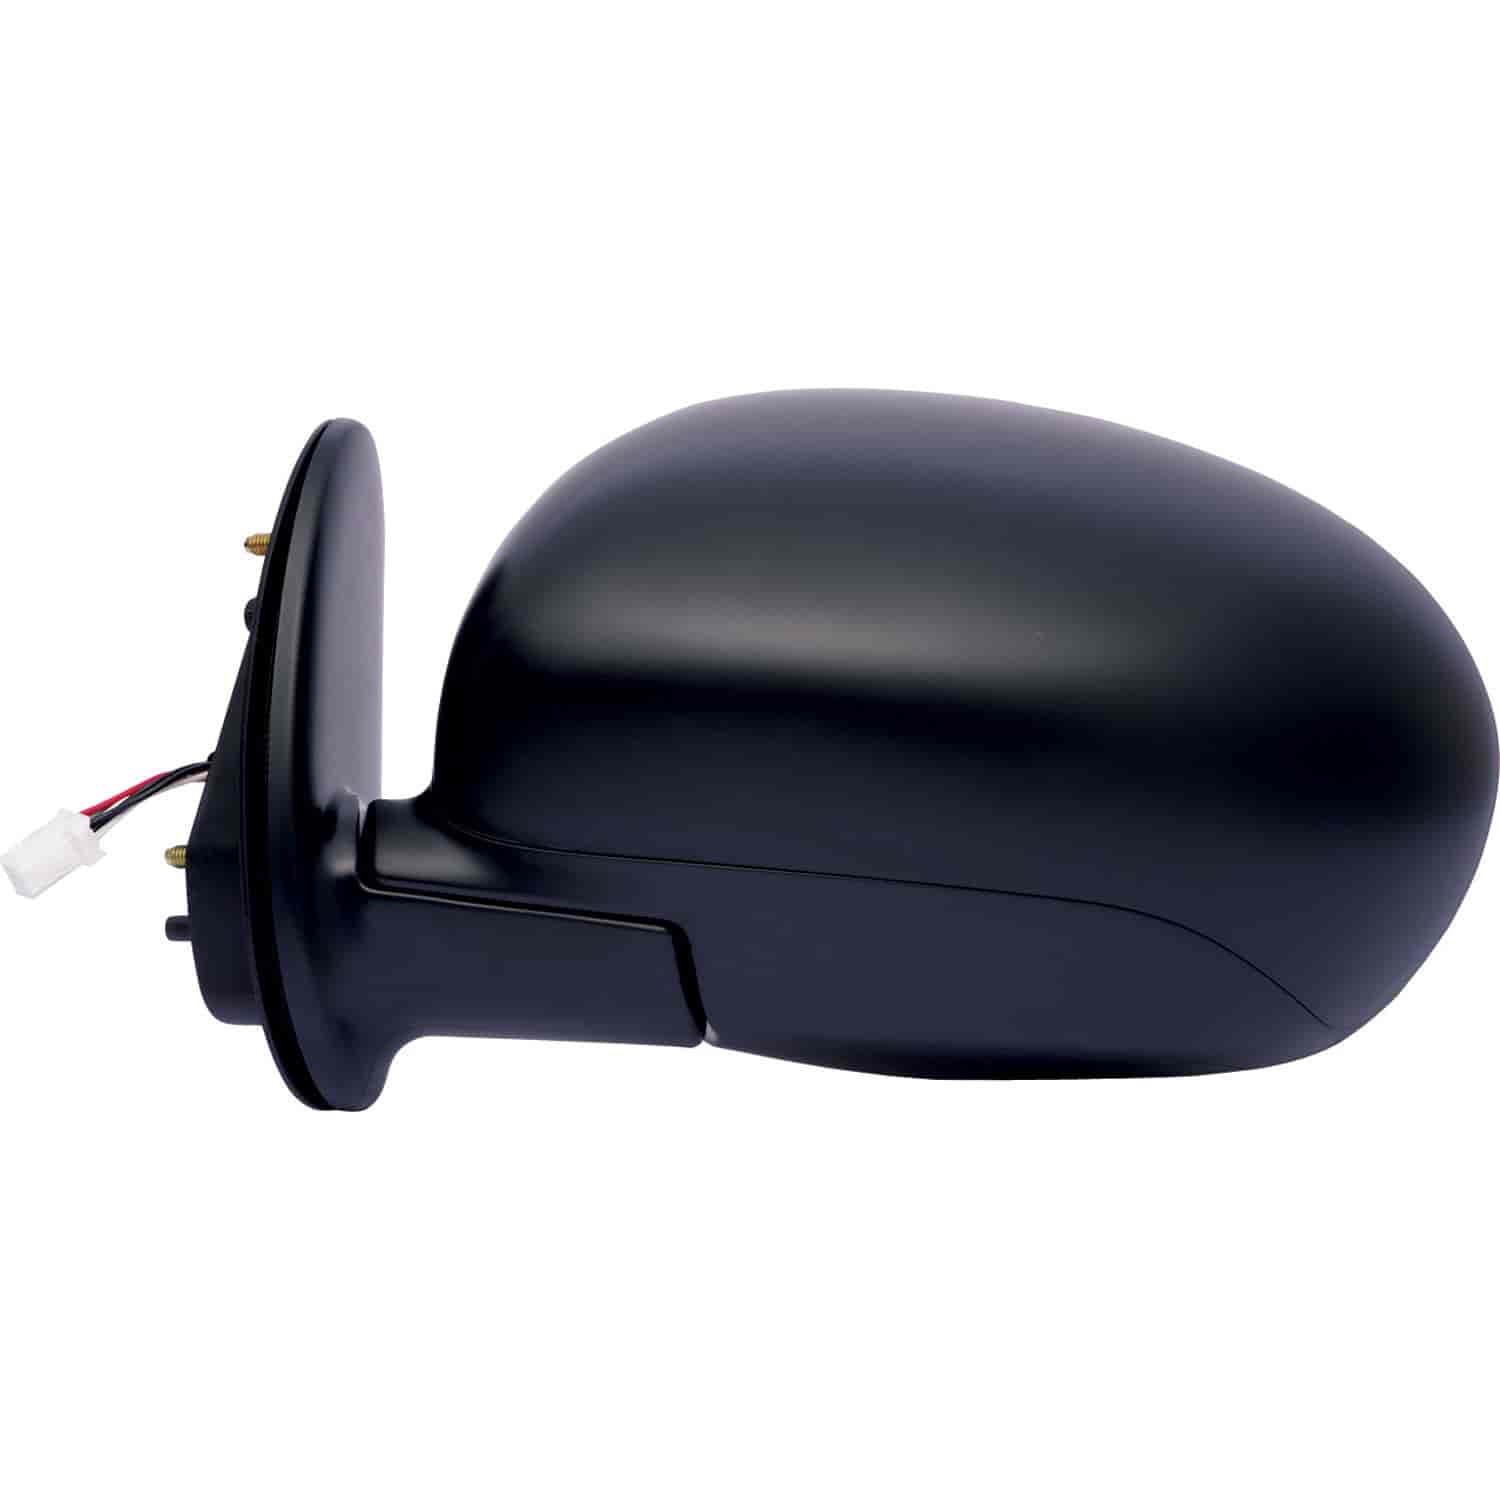 OEM Style Replacement mirror for 09-14 Nissan Cube driver side mirror tested to fit and function lik